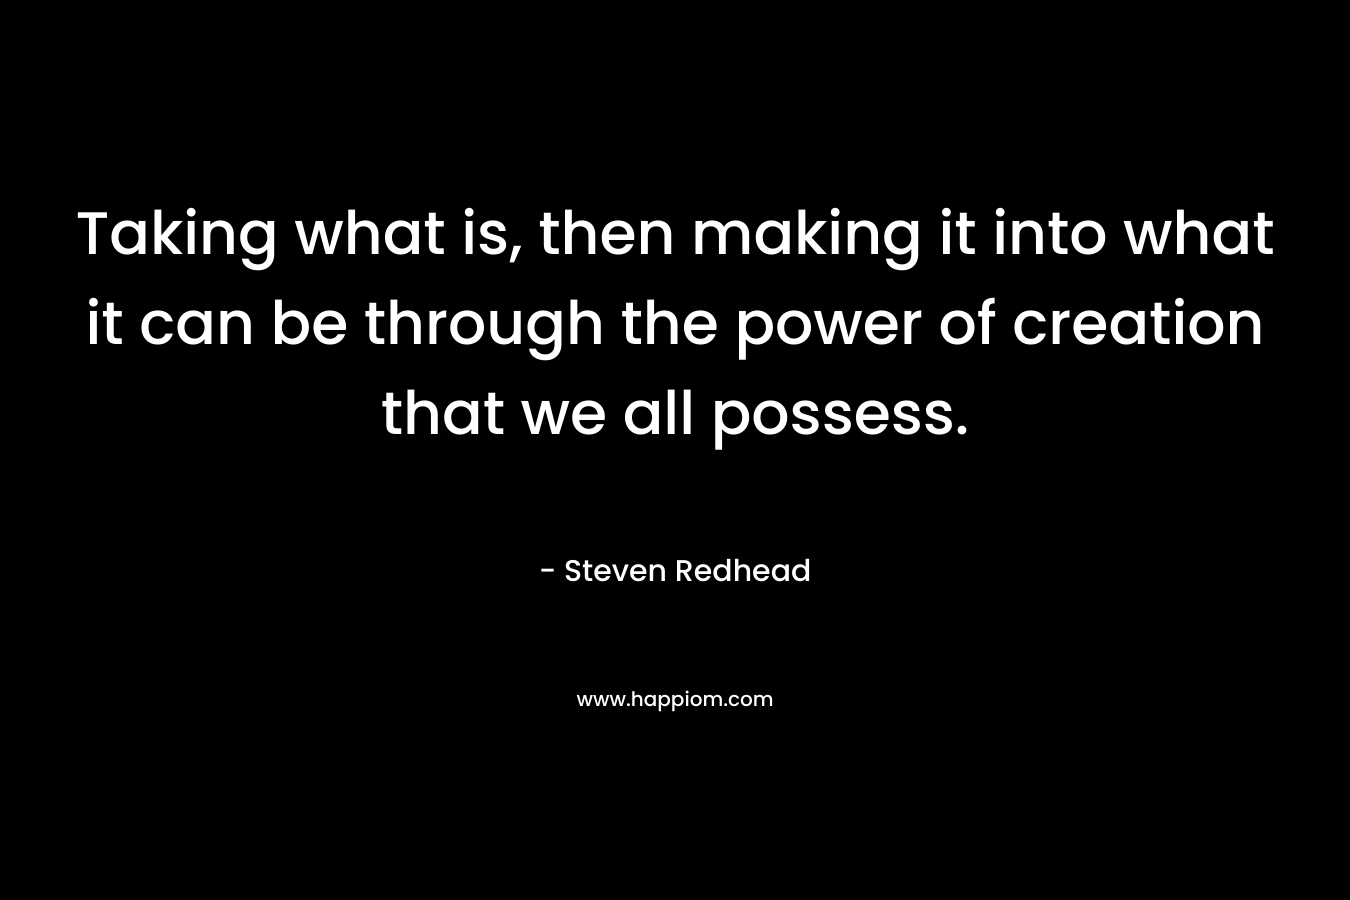 Taking what is, then making it into what it can be through the power of creation that we all possess. – Steven Redhead